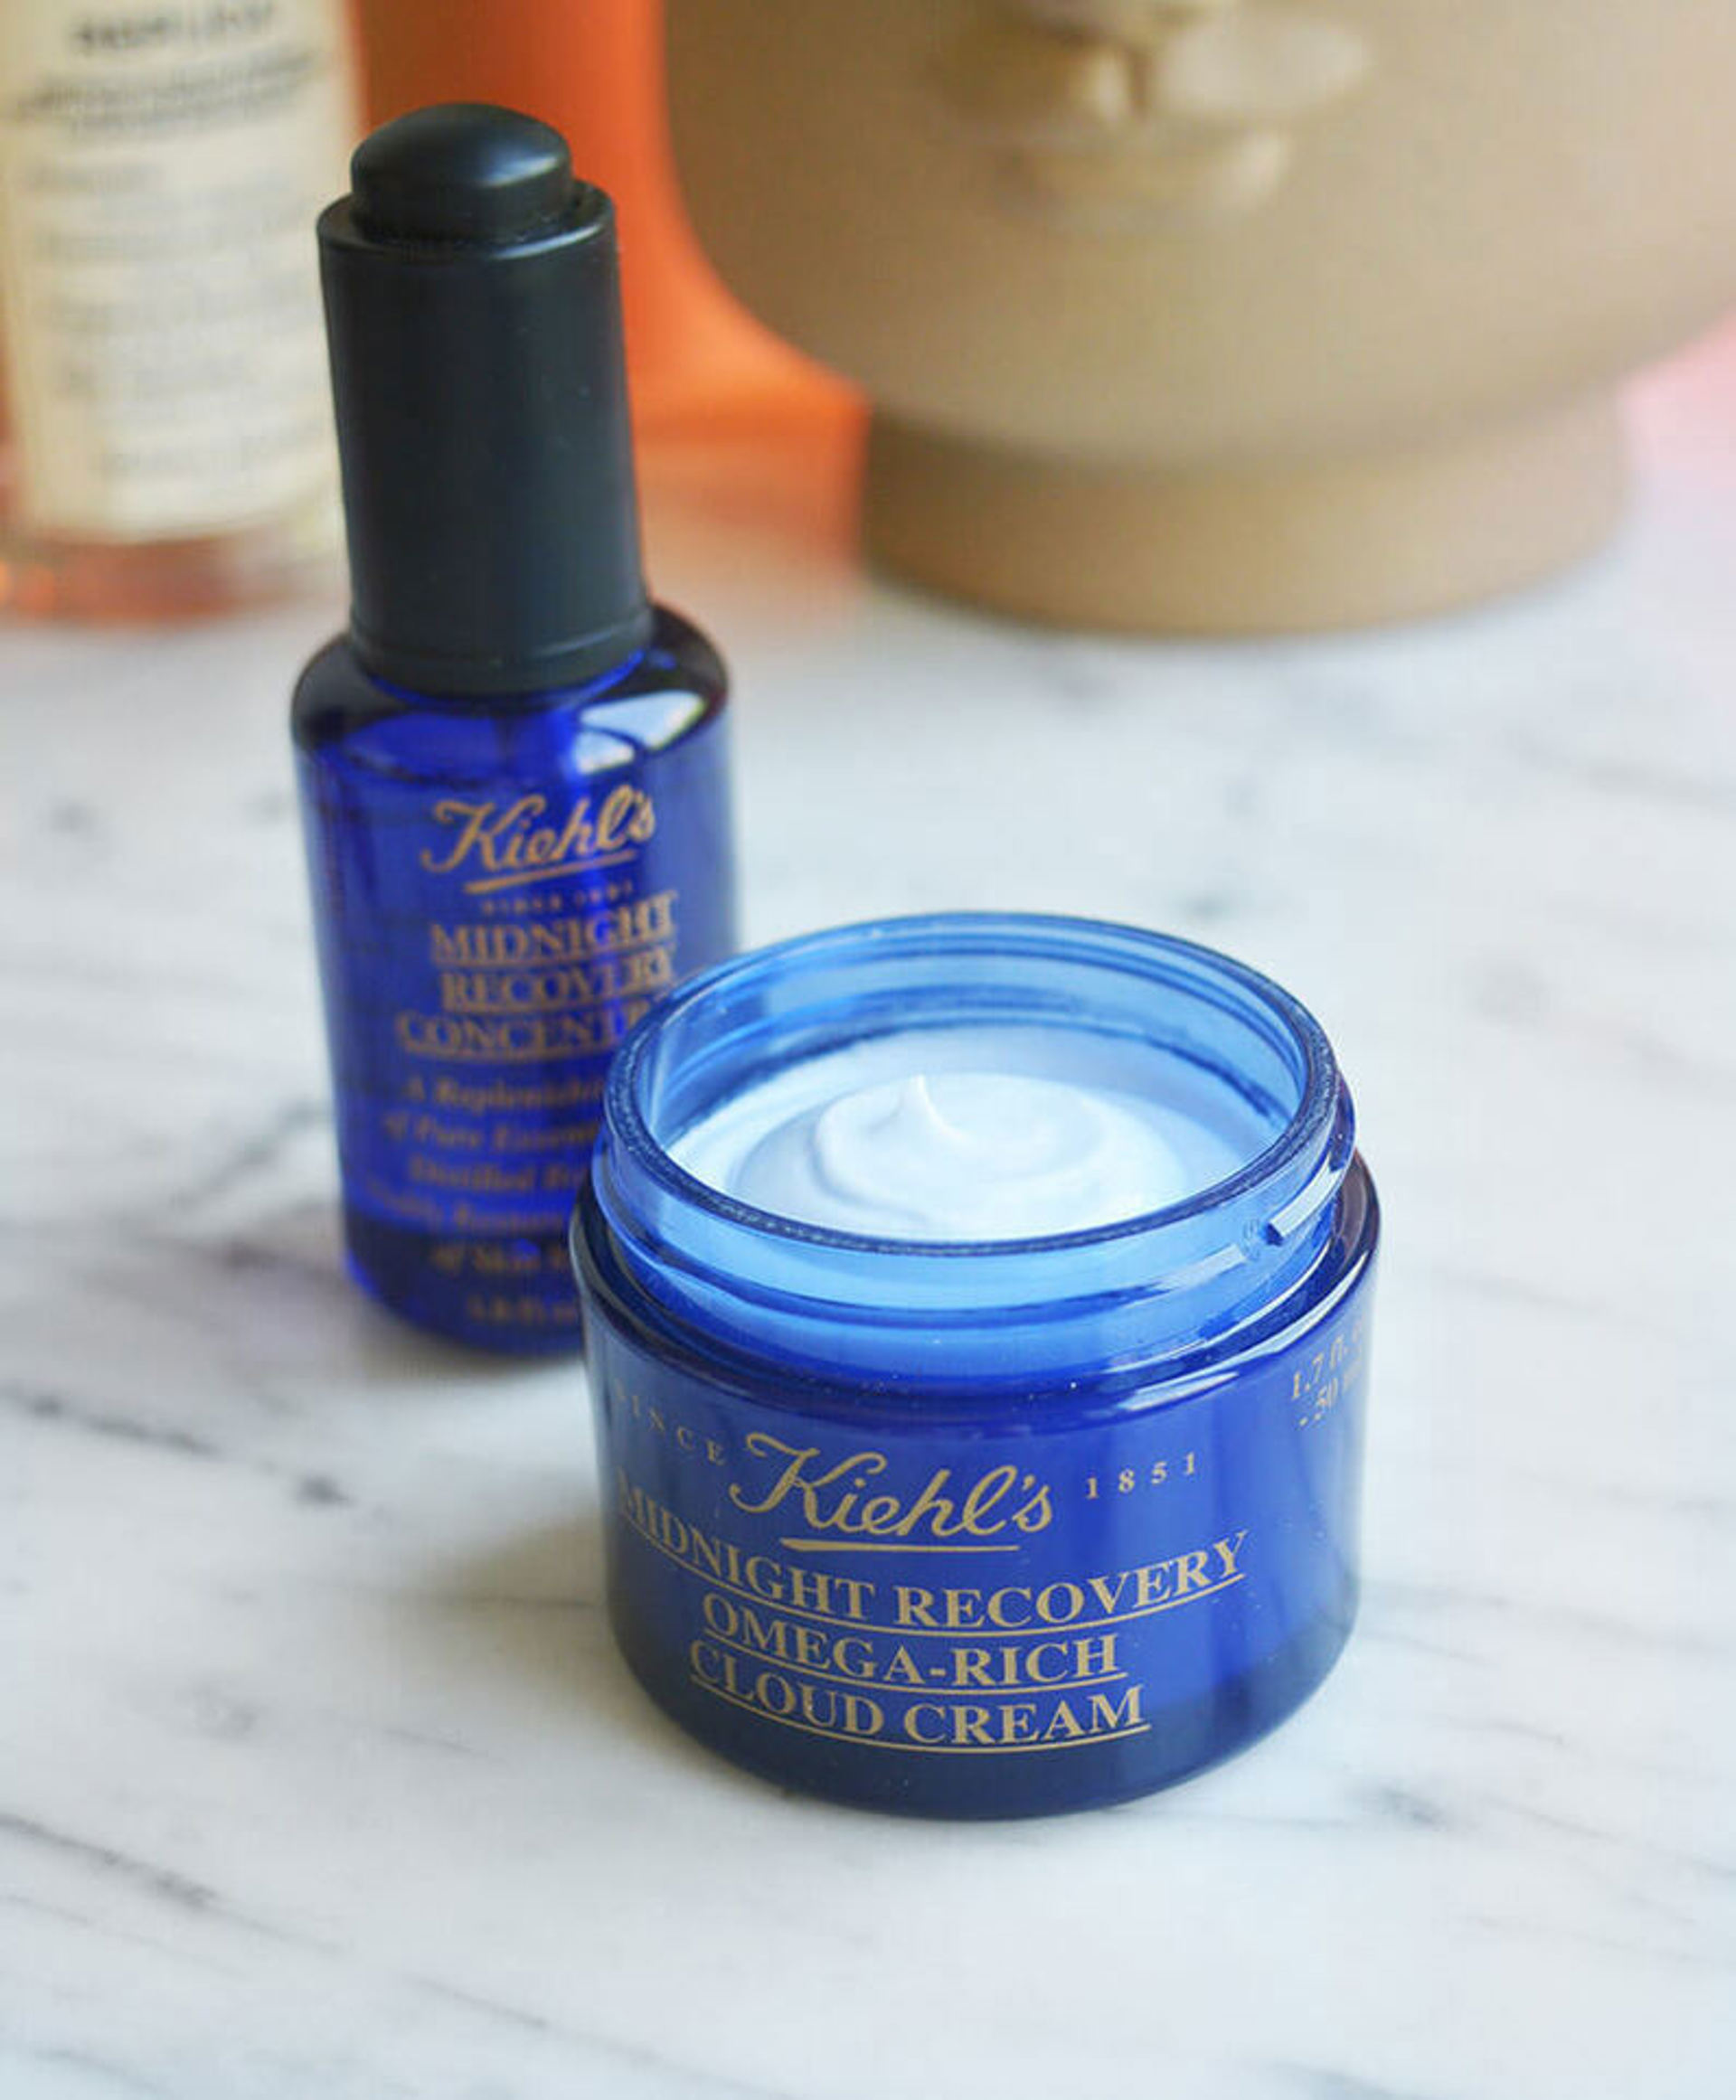 3. Kiehl's Midnight Recovery Omega-Rich Cloud Cream